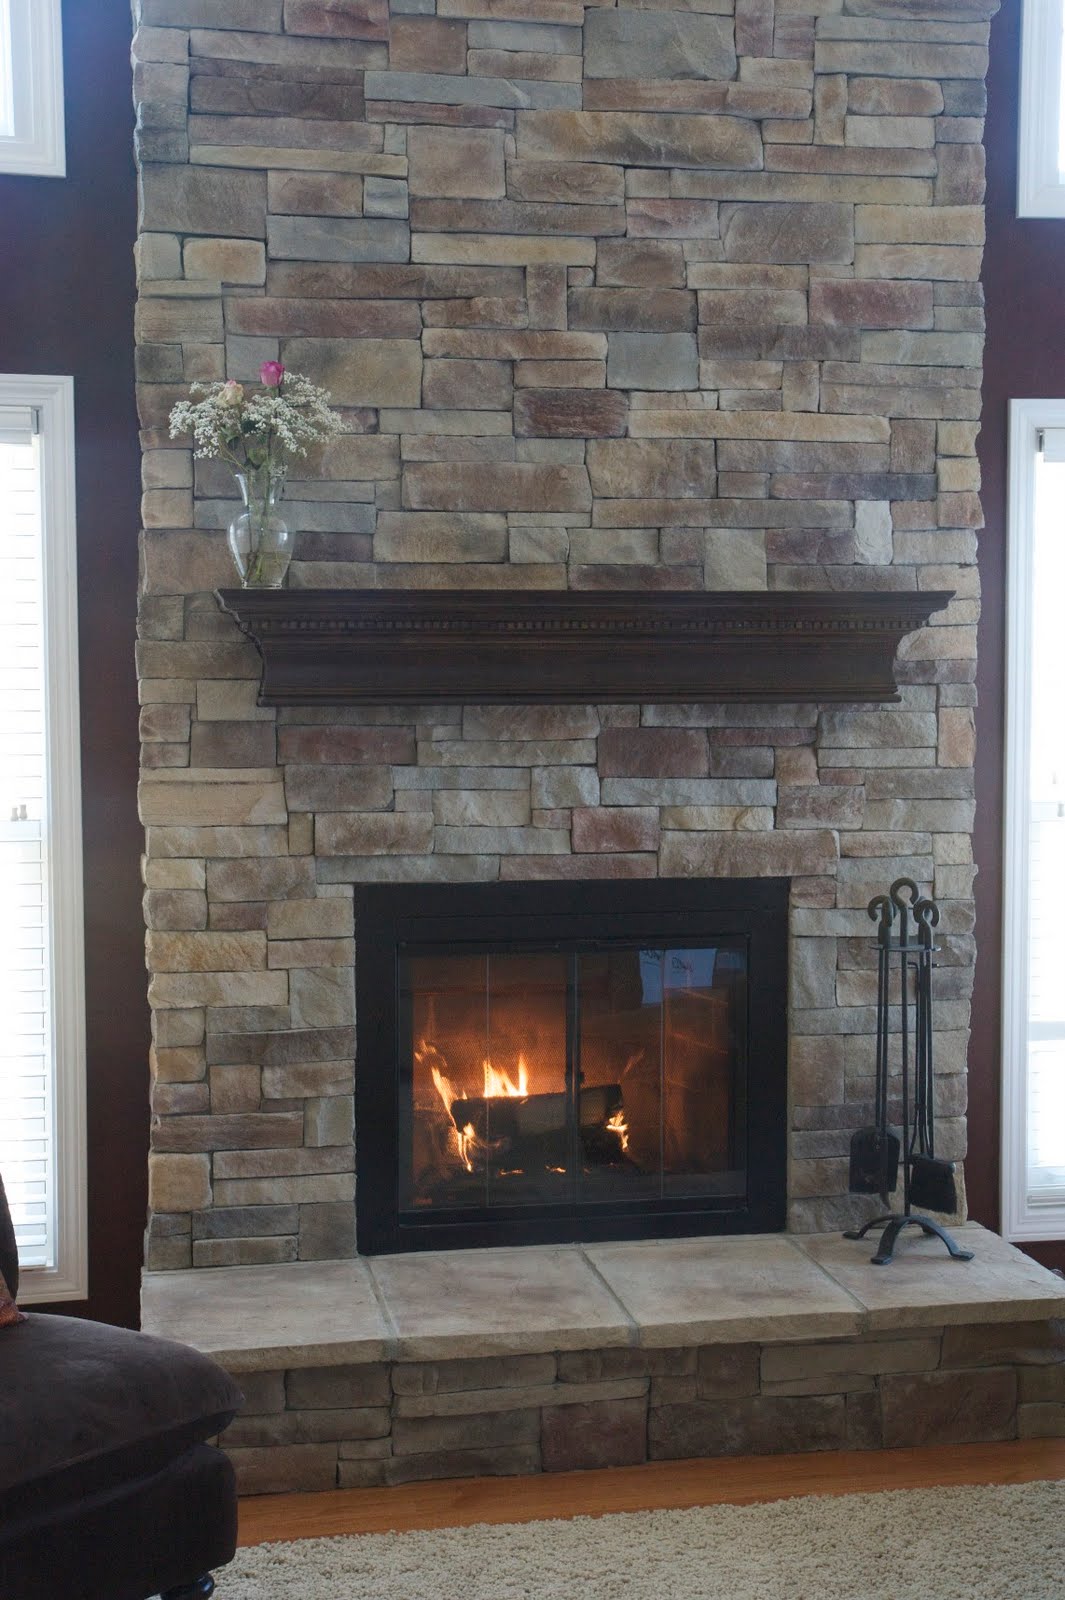 Brick fireplace refurbished with new stone veneer. The manufactured  title=